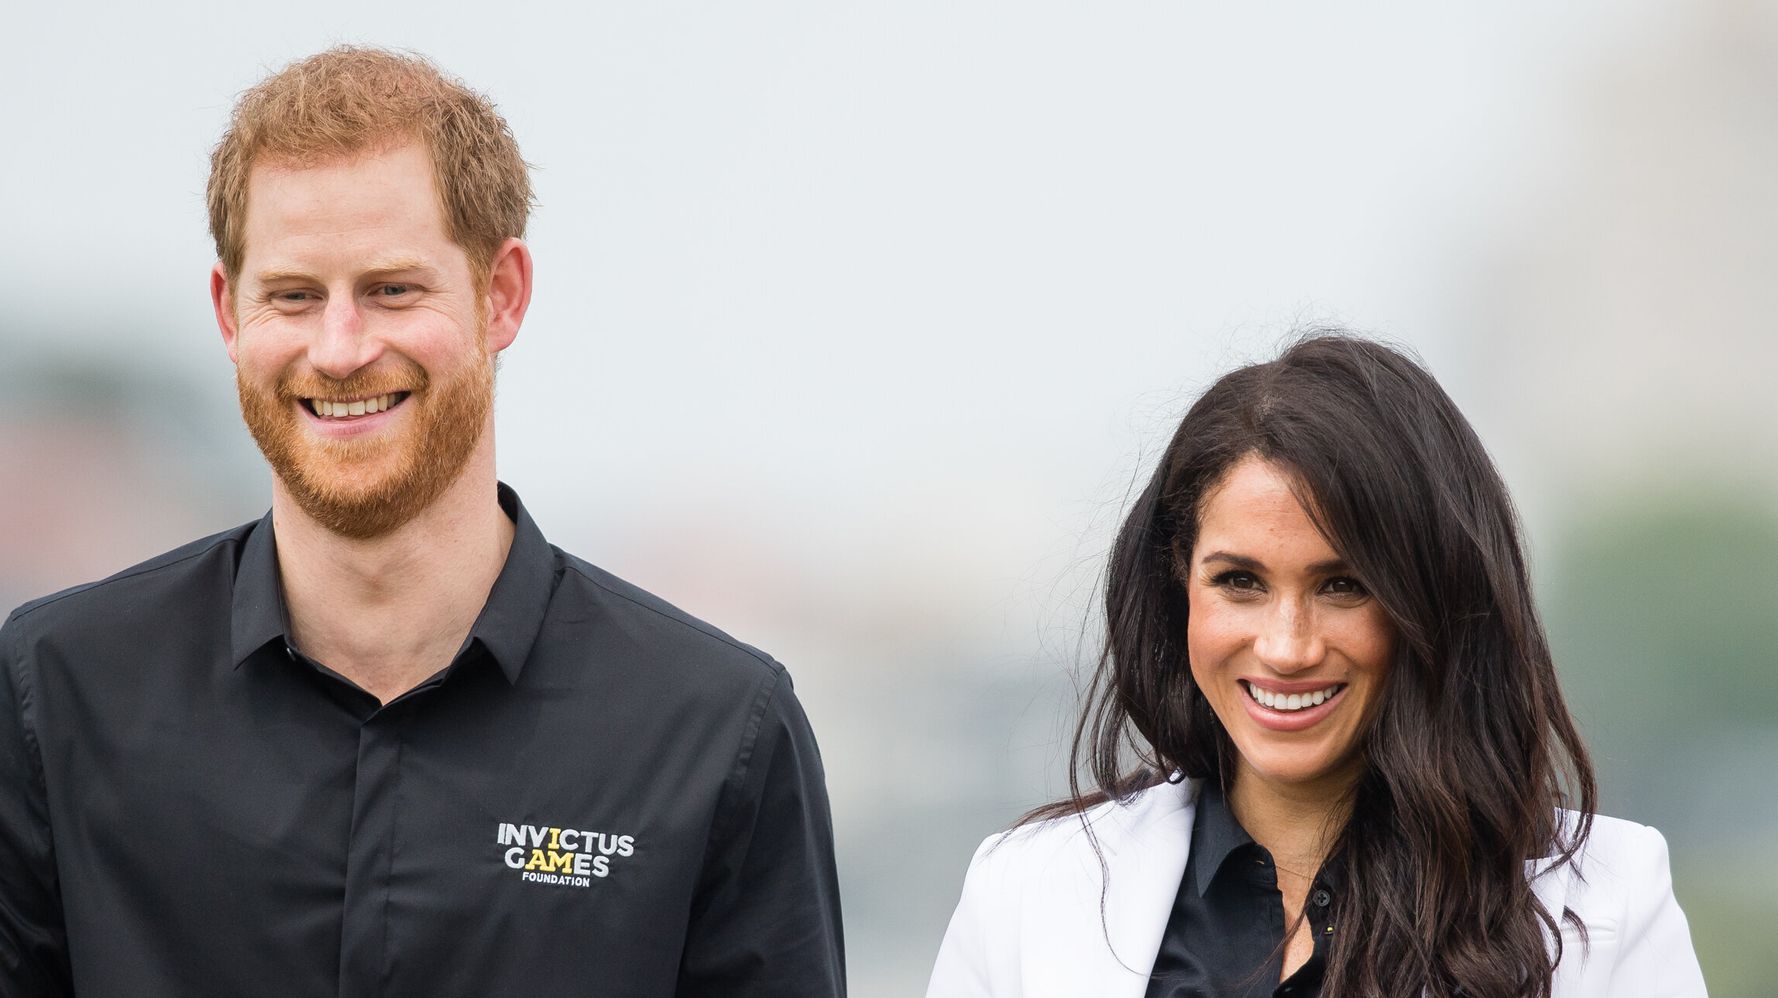 Prince Harry and Meghan Markle’s first Netflix series is on its way